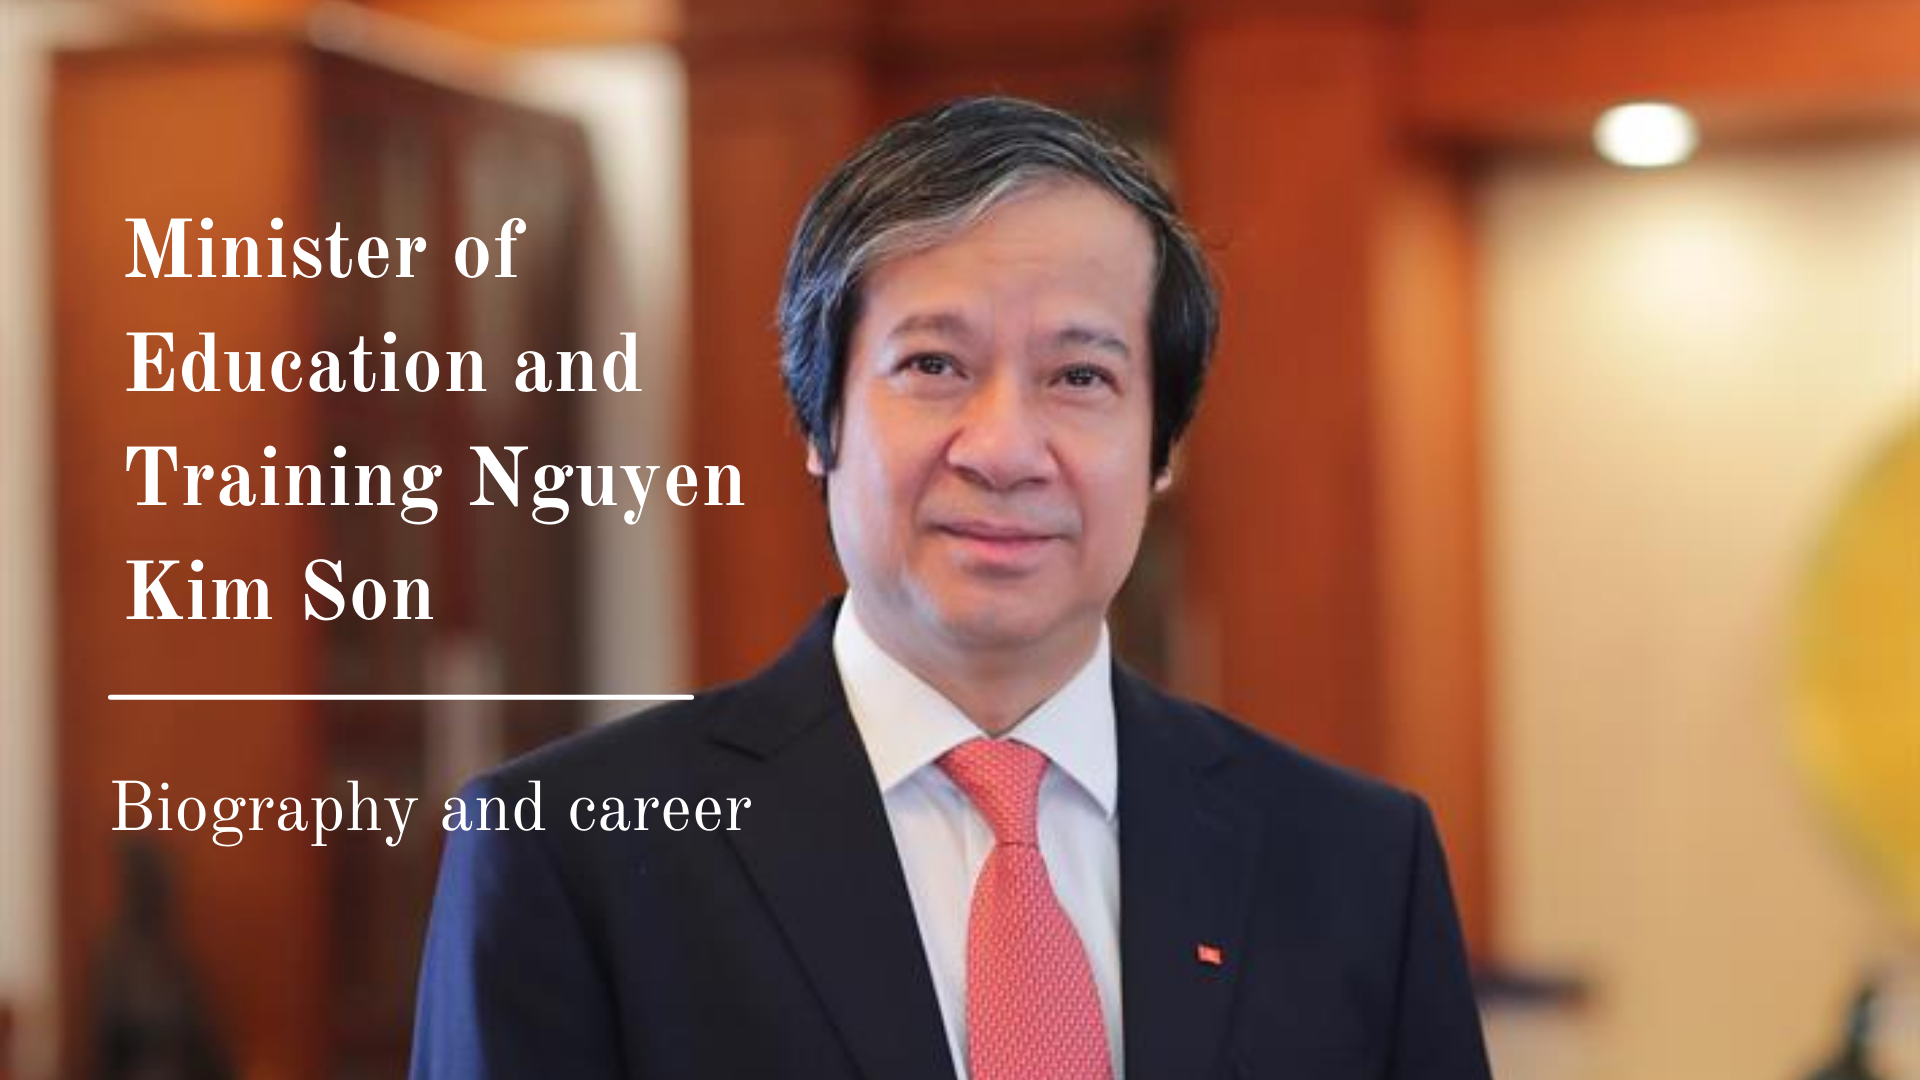 Minister of Education and Training Nguyen Kim Son: Biography, Positions and Working History